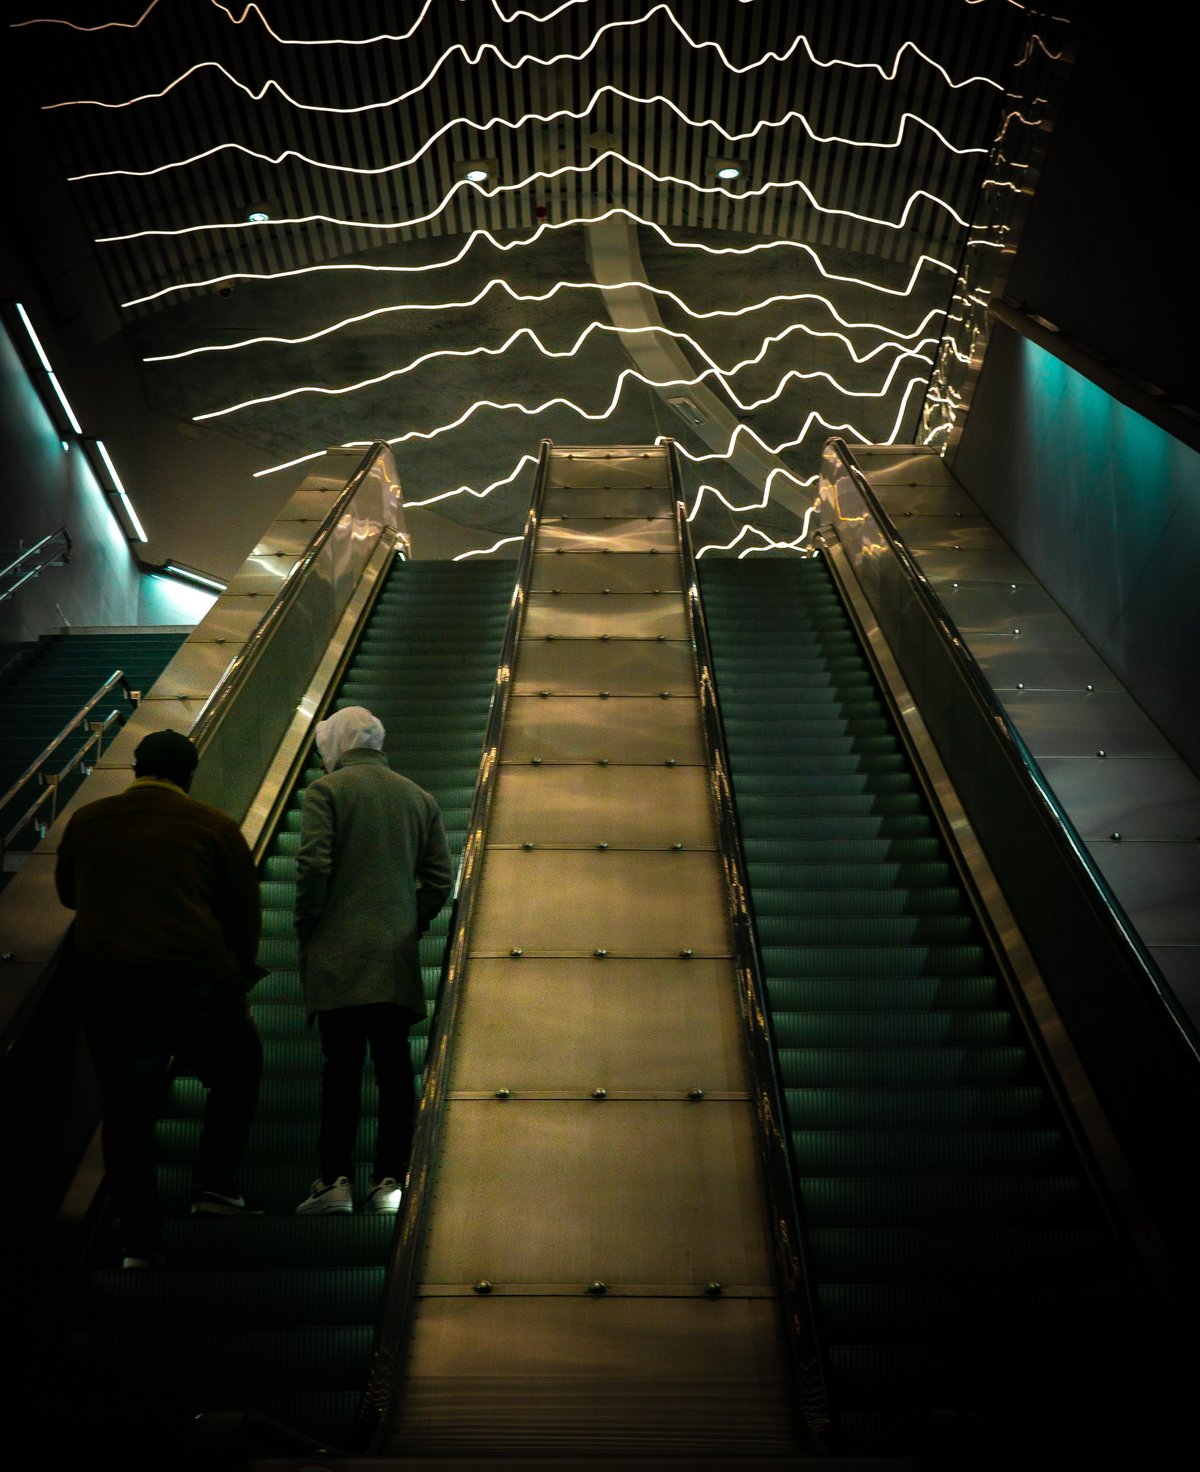 An escalator in Stockholm seen from below. The ceiling is filled with lights in zig-zag shapes, a kind of art constellation. Two boys are standing on the escalator going upwards, wearing hats and hoodies with their back towards the camera. The photo is very dark.